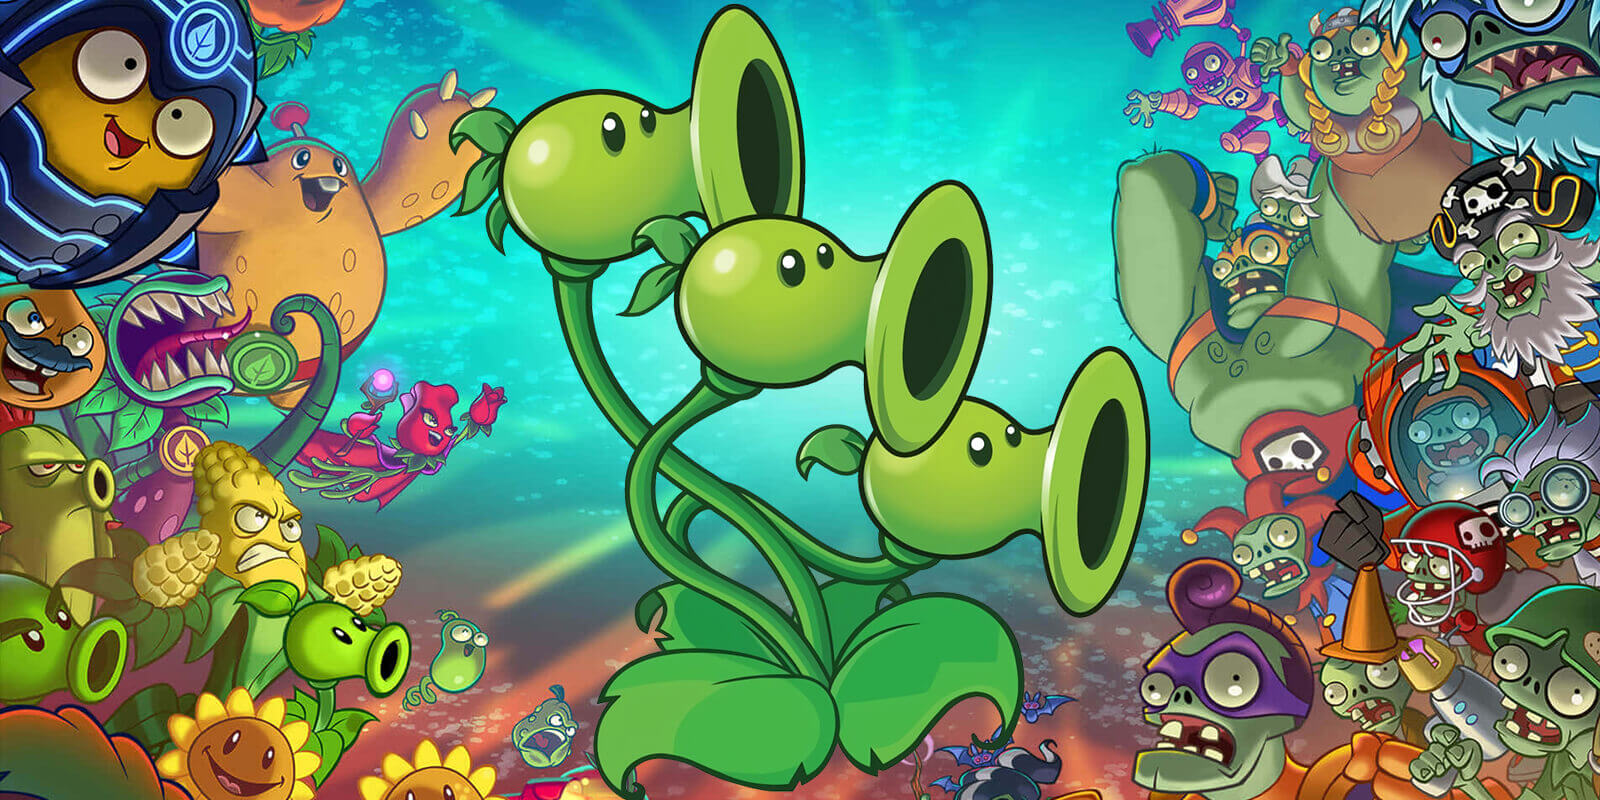 3peater - What is 3peater short for in Plants vs. Zombies games?